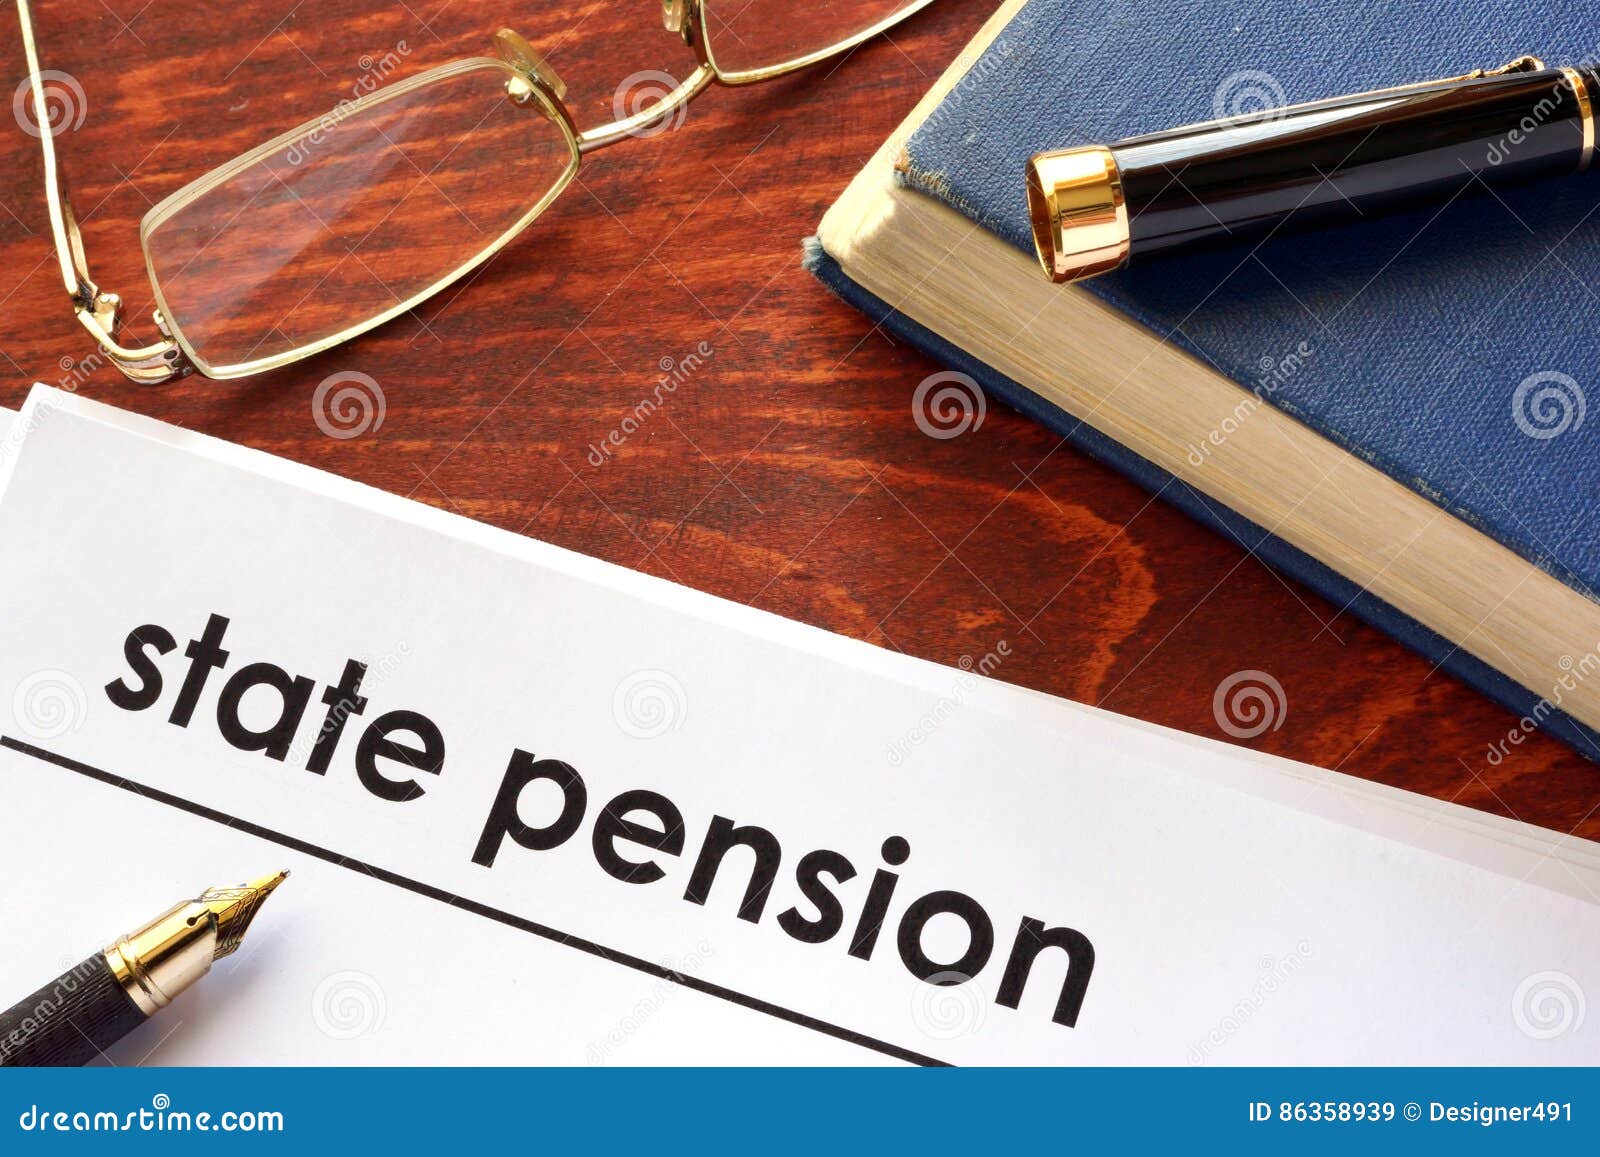 paper with title state pension.